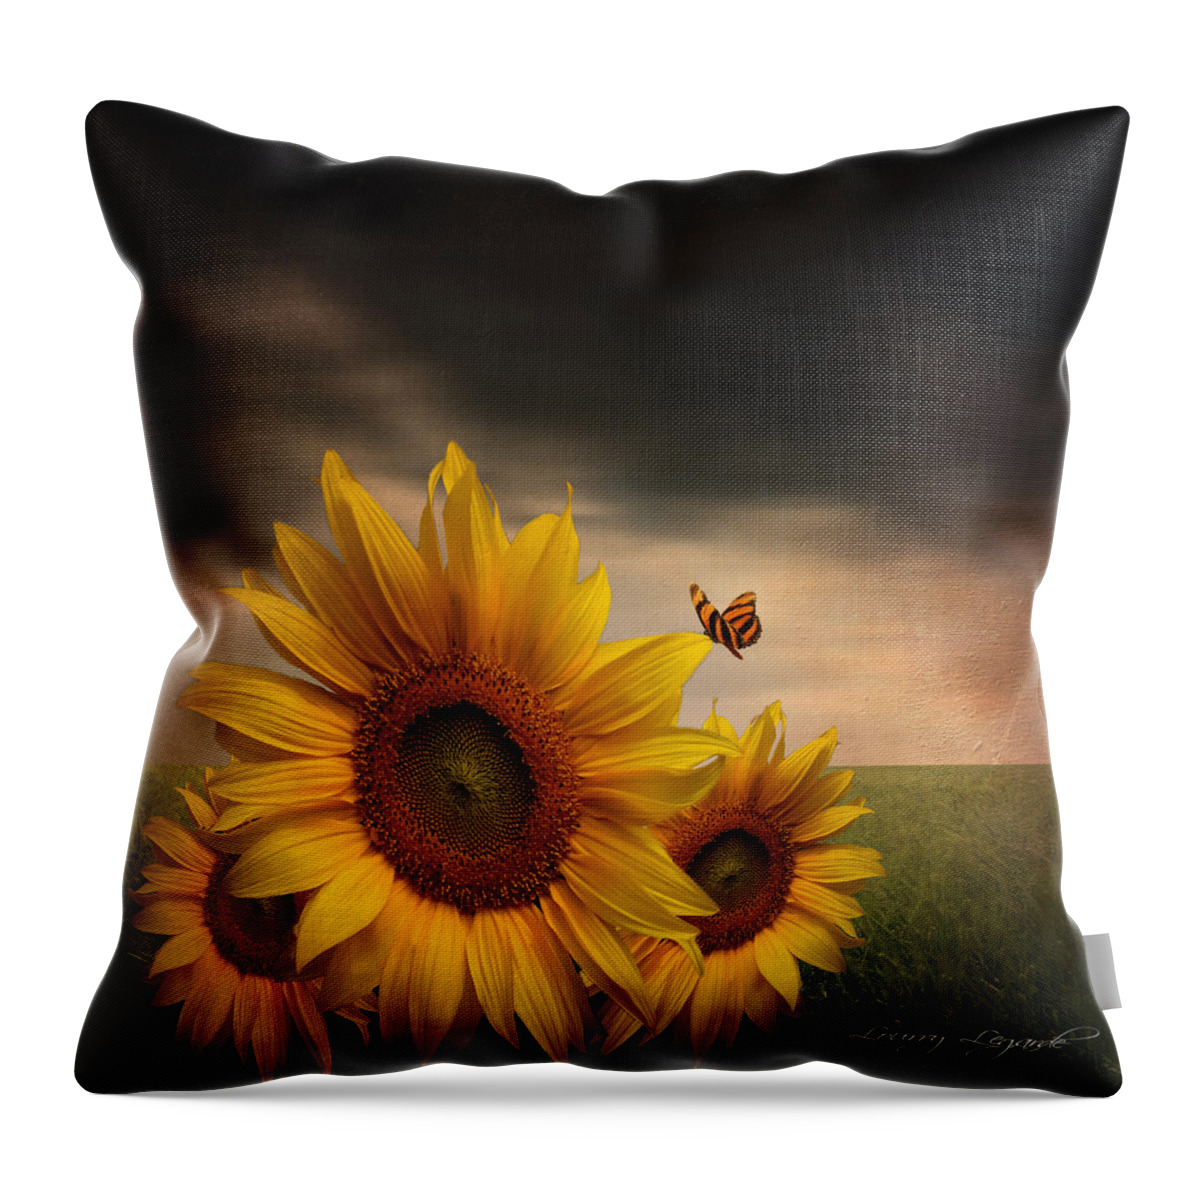 Sunflower Throw Pillow featuring the photograph Trinity by Lourry Legarde